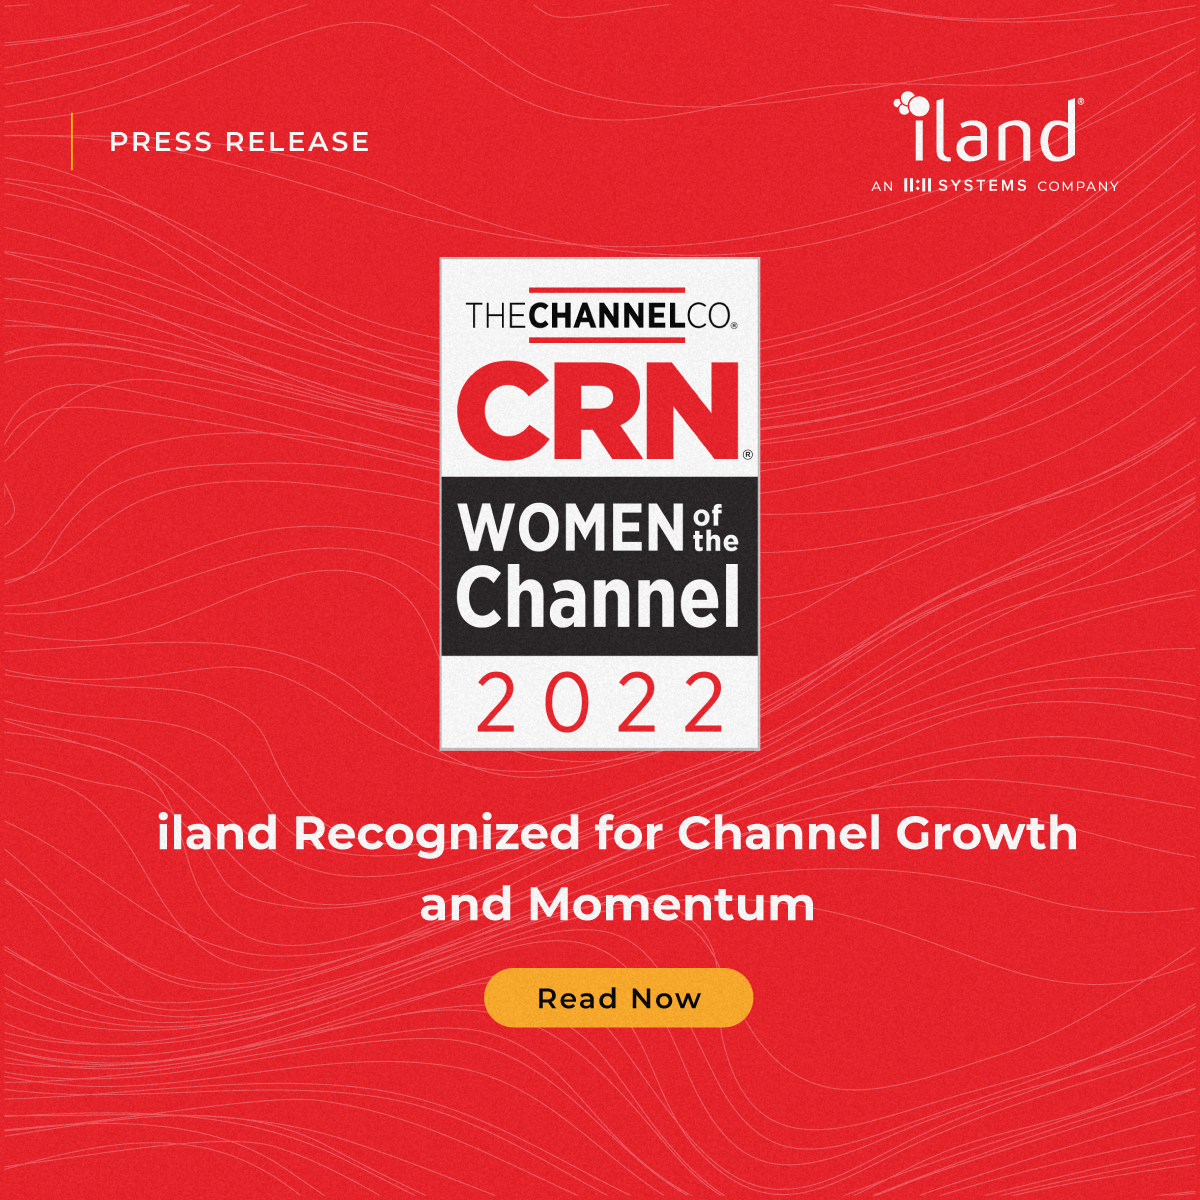 iland Recognized for Channel Growth and Momentum